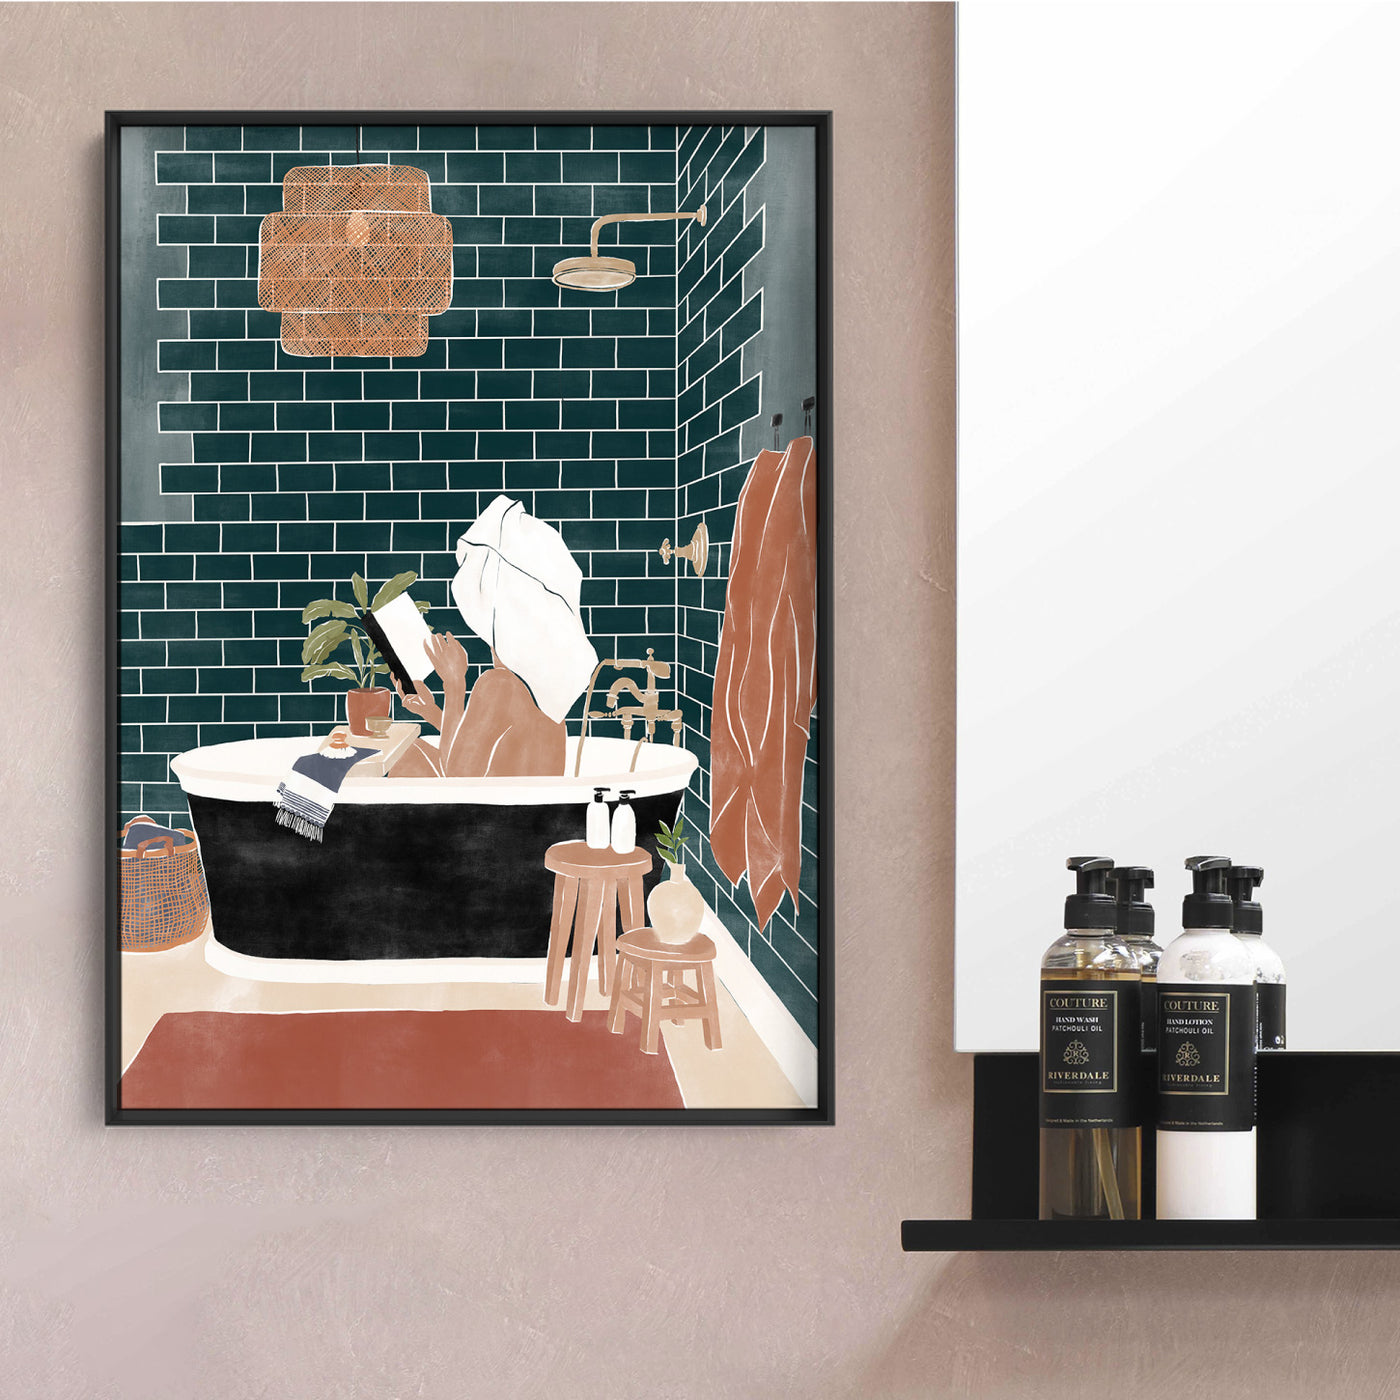 Bathroom Bliss - Art Print by Ivy Green Illustrations, Poster, Stretched Canvas or Framed Wall Art Prints, shown framed in a room